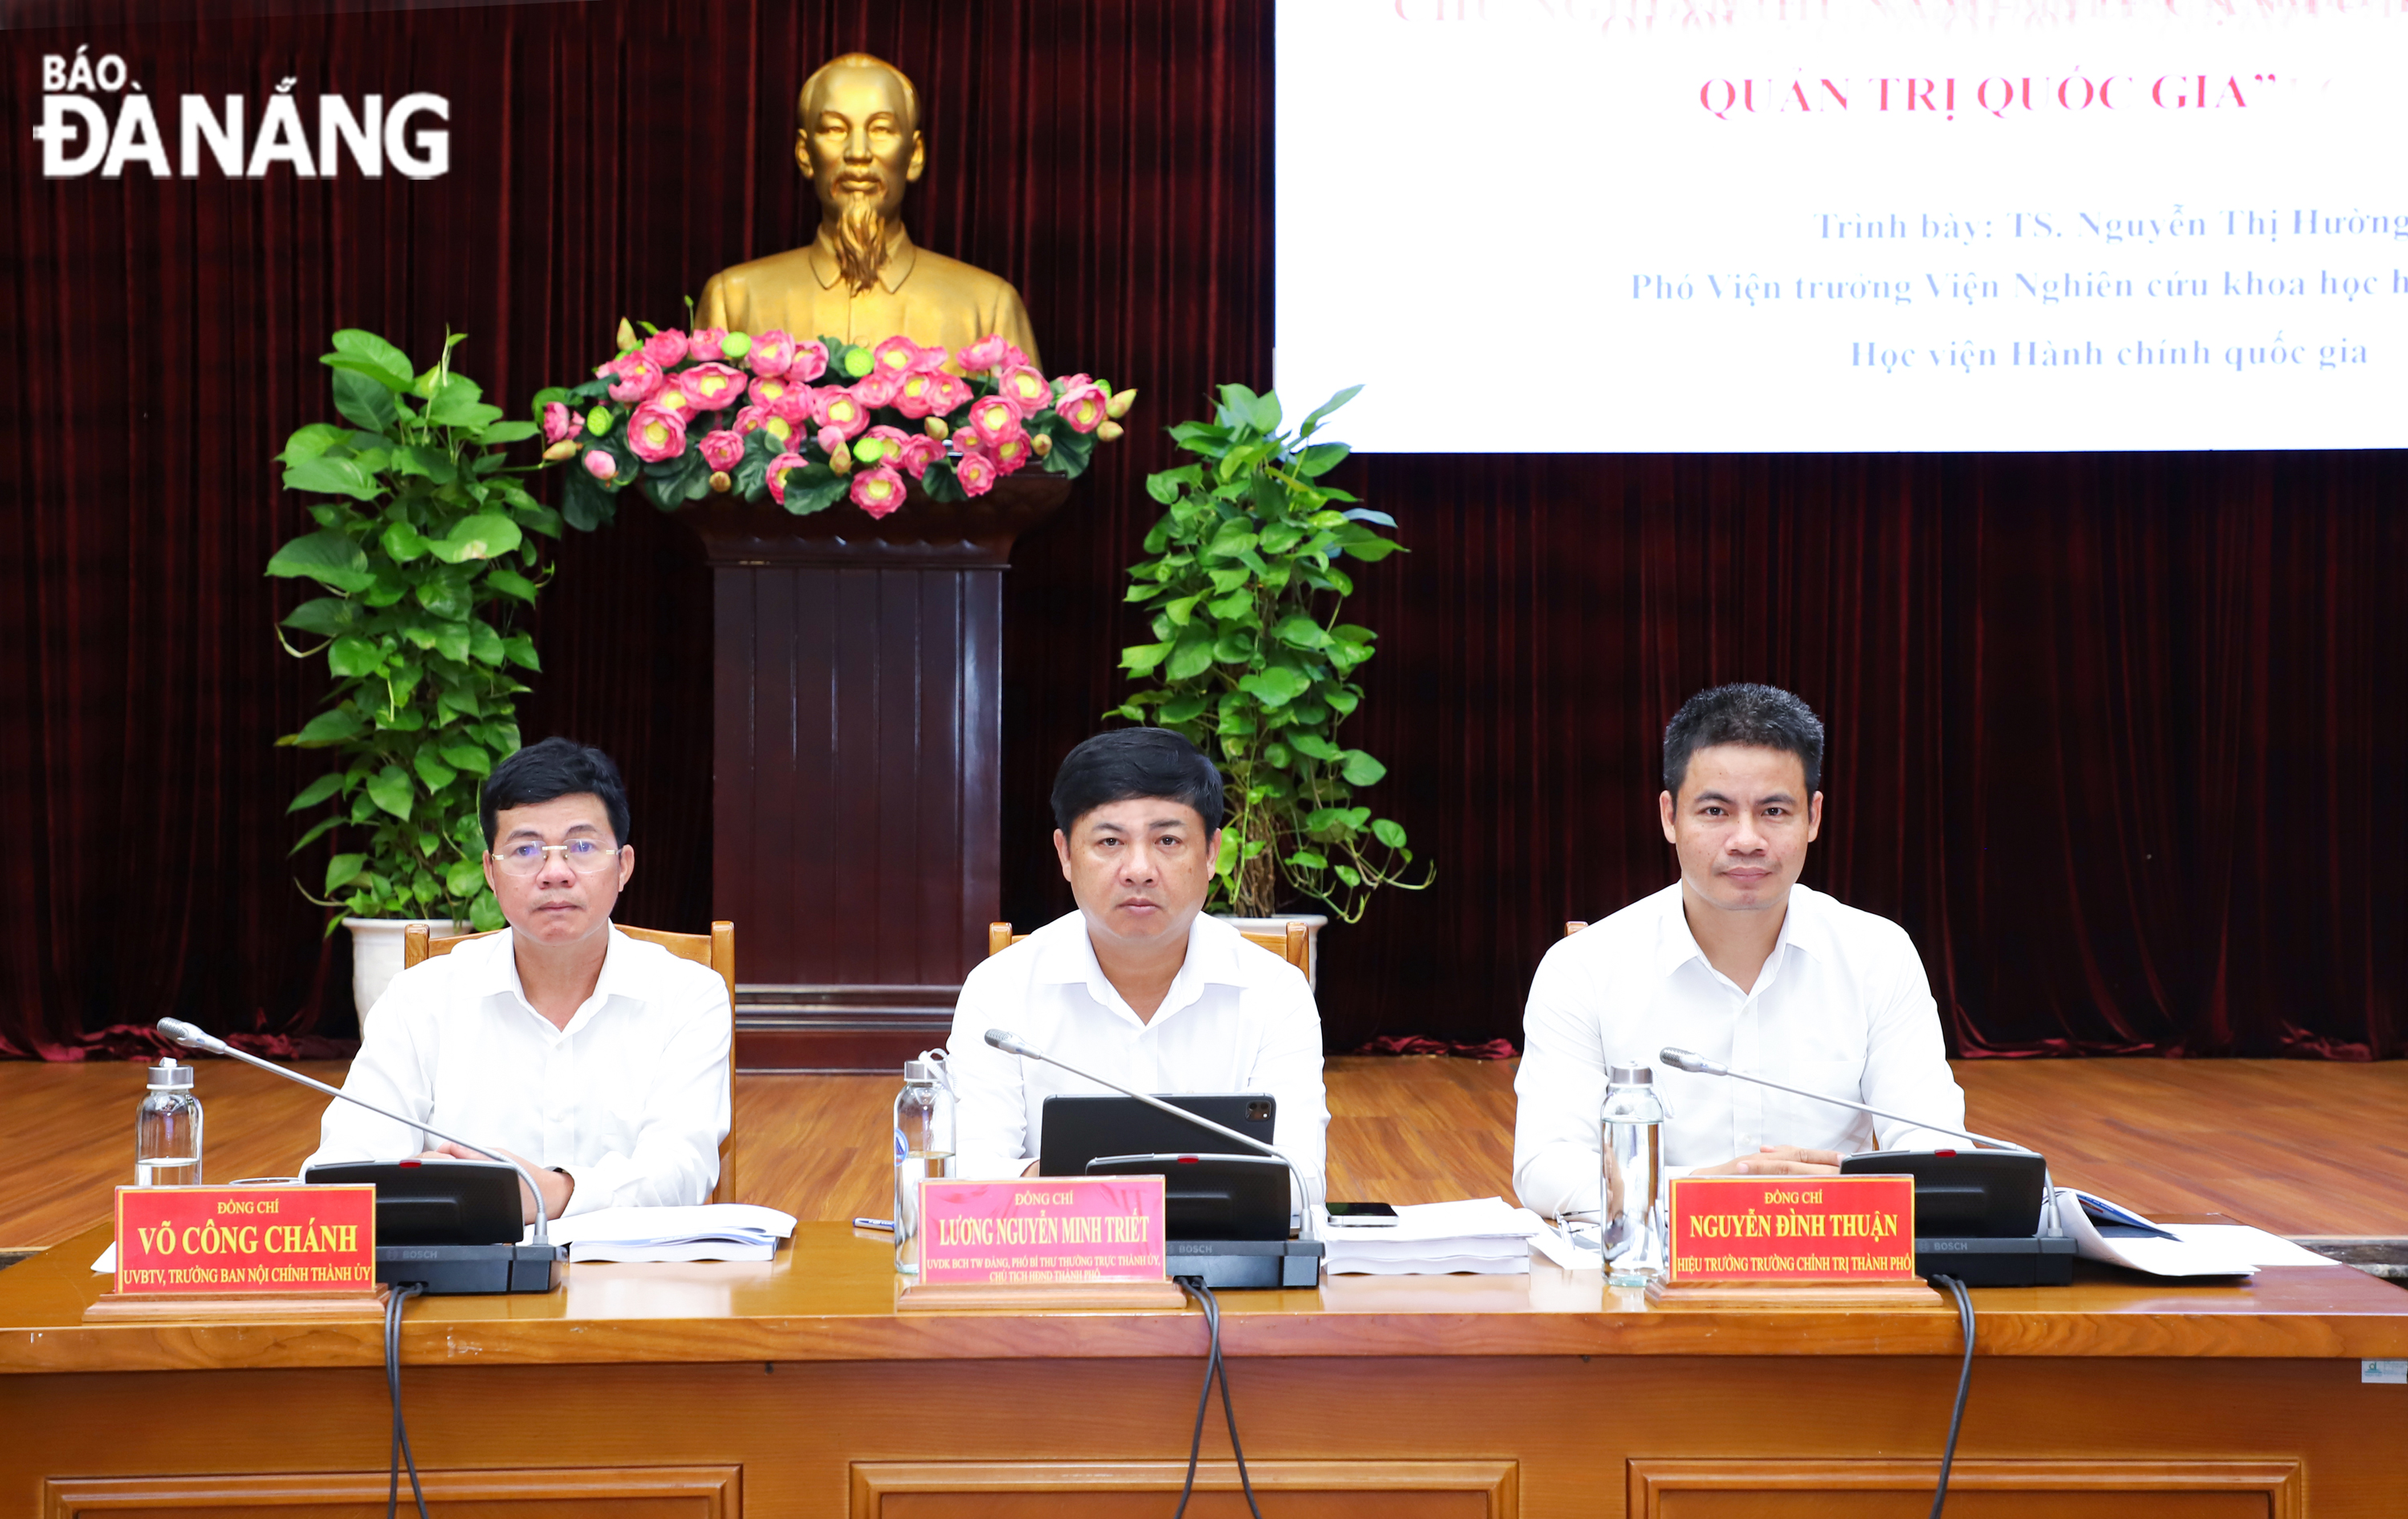 Permanent Deputy Secretary of the Da Nang Party Committee Luong Nguyen Minh Triet (center); Head of the municipal Party Committee's Commission for Internal Affairs Vo Cong Chanh (left); and Principal of the School of Politics Nguyen Dinh Thuan (right) chair the Thursday seminar